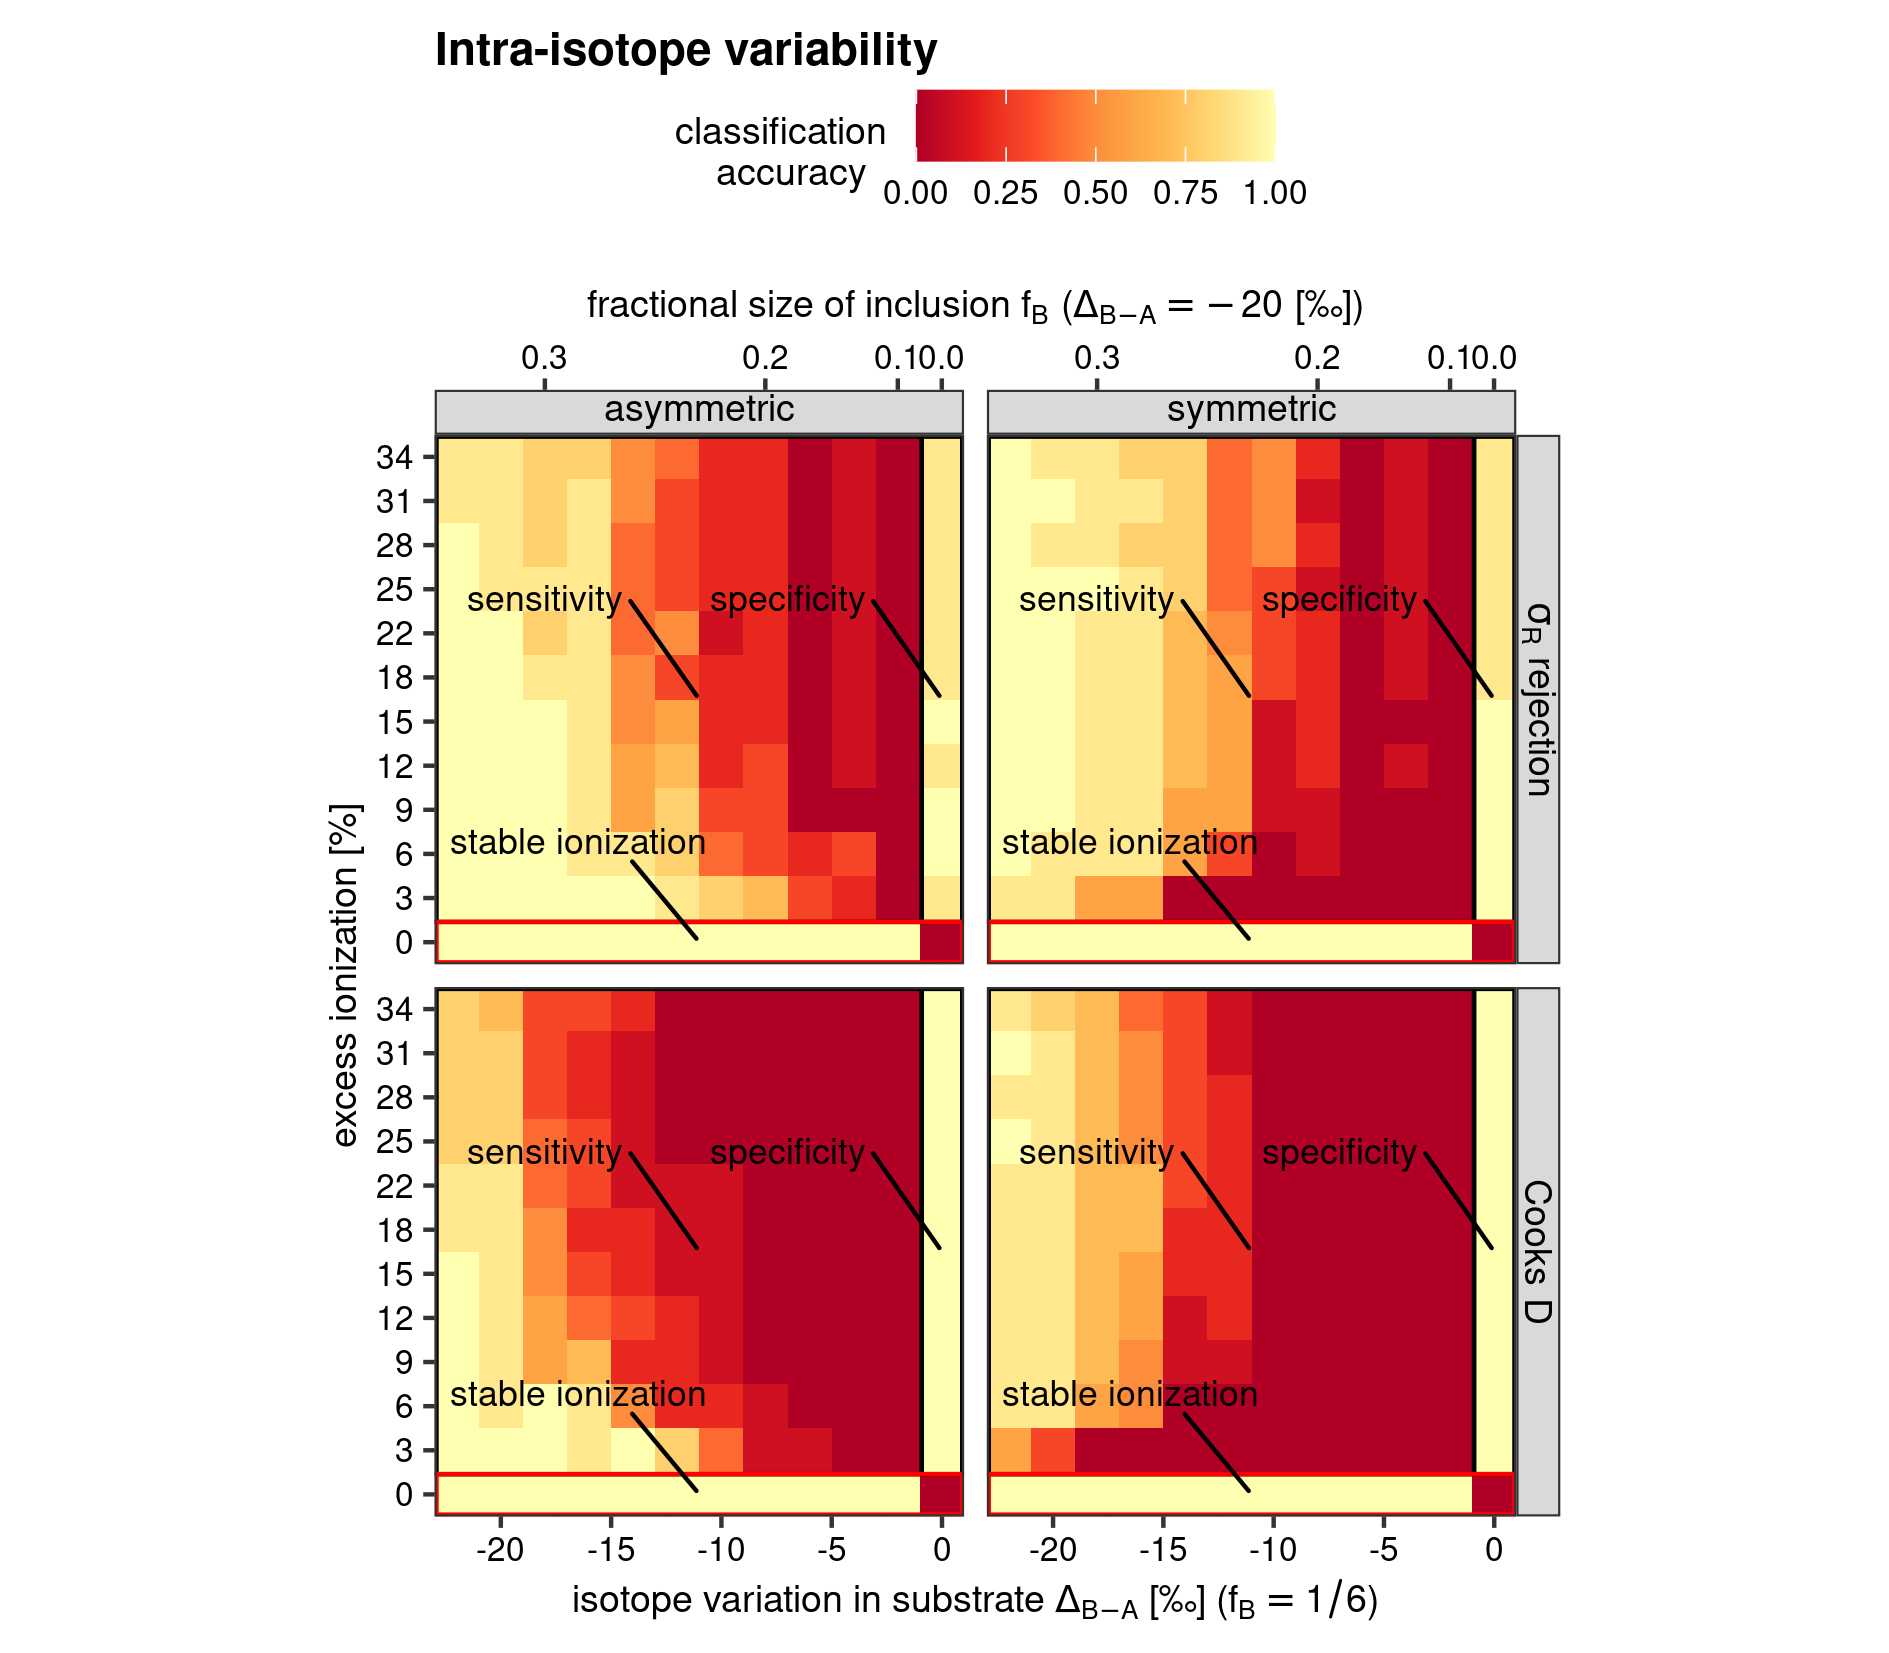 Heatmap for model classification accuracy of the intra-isotope variability test